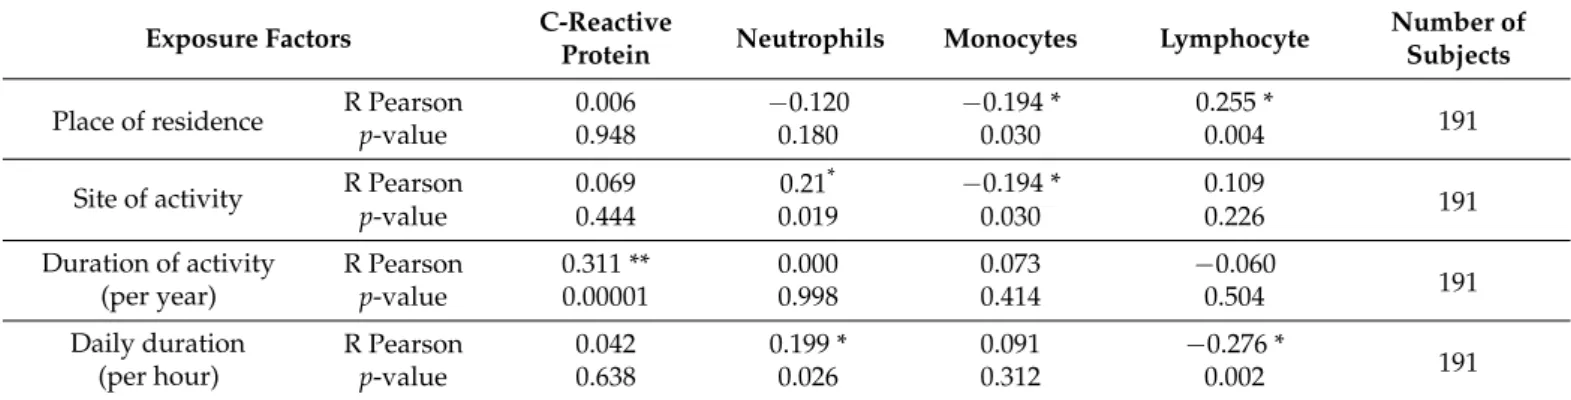 Table 6 shows a significant influence of place of residence, site and daily duration (per hour) of activity on changes in neutrophils, lymphocytes and monocytes